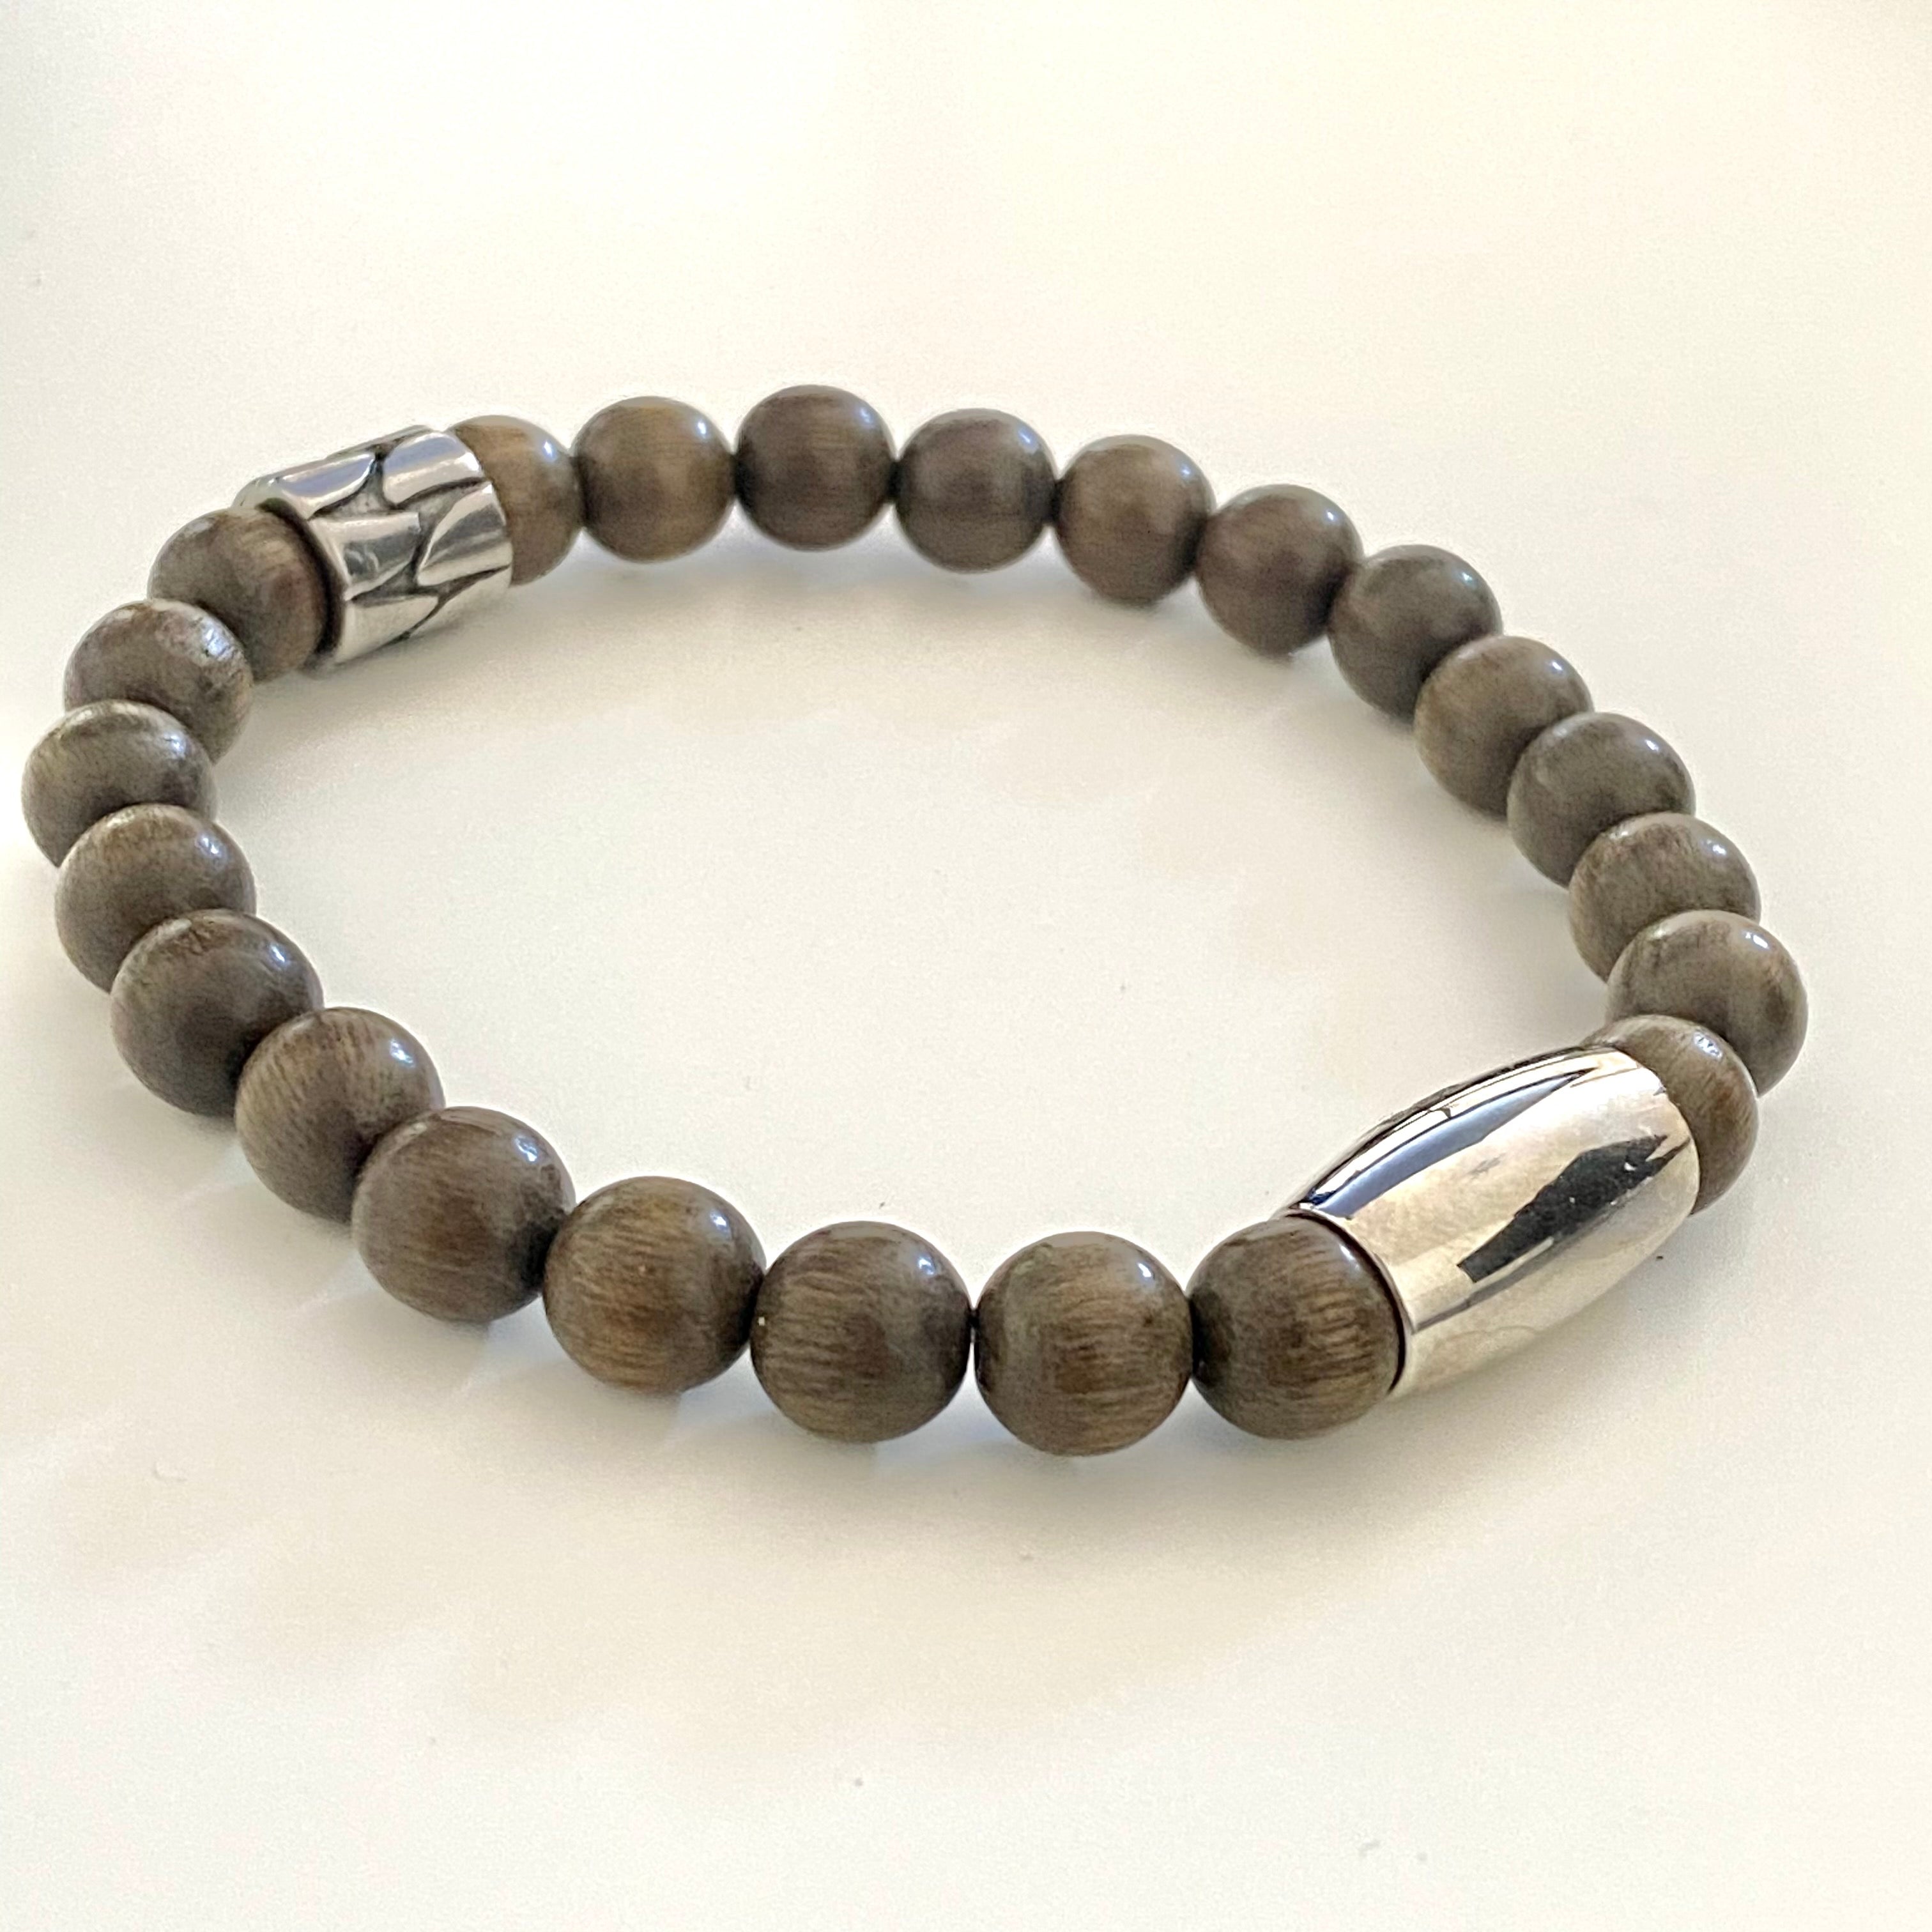 Men's Wooden Bead Bracelet with Stainless Steel Spacers